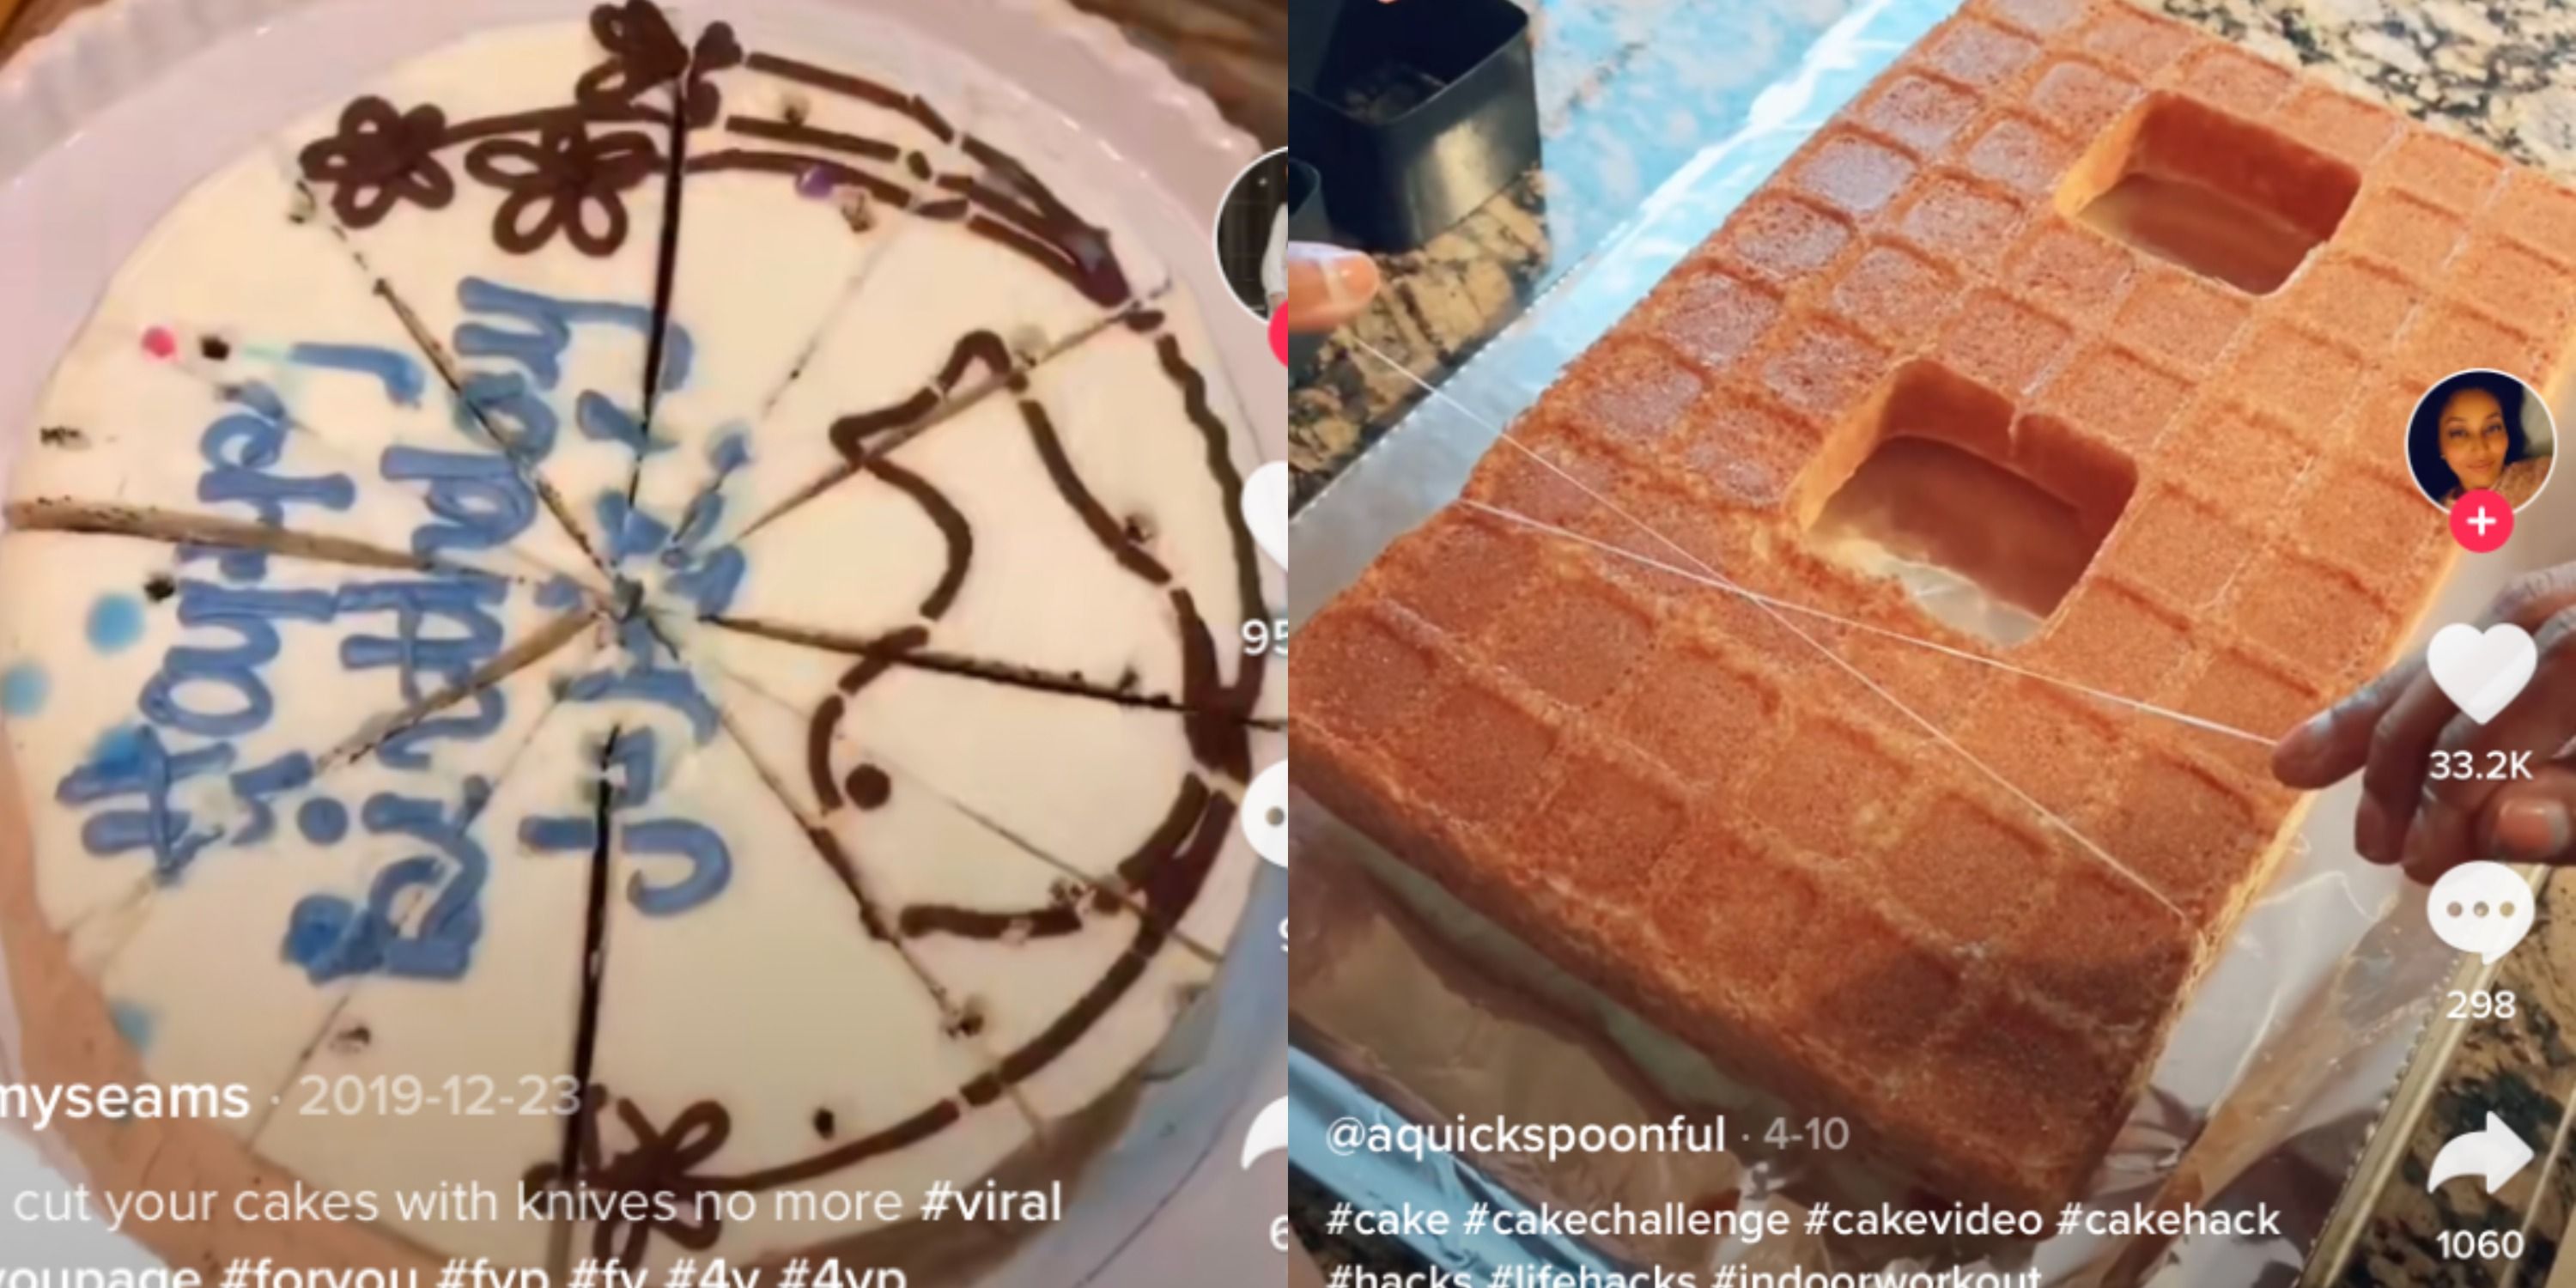 Cake Cutting Guide: The Easiest Way to Cut a Round Cake - Amycakes Bakes